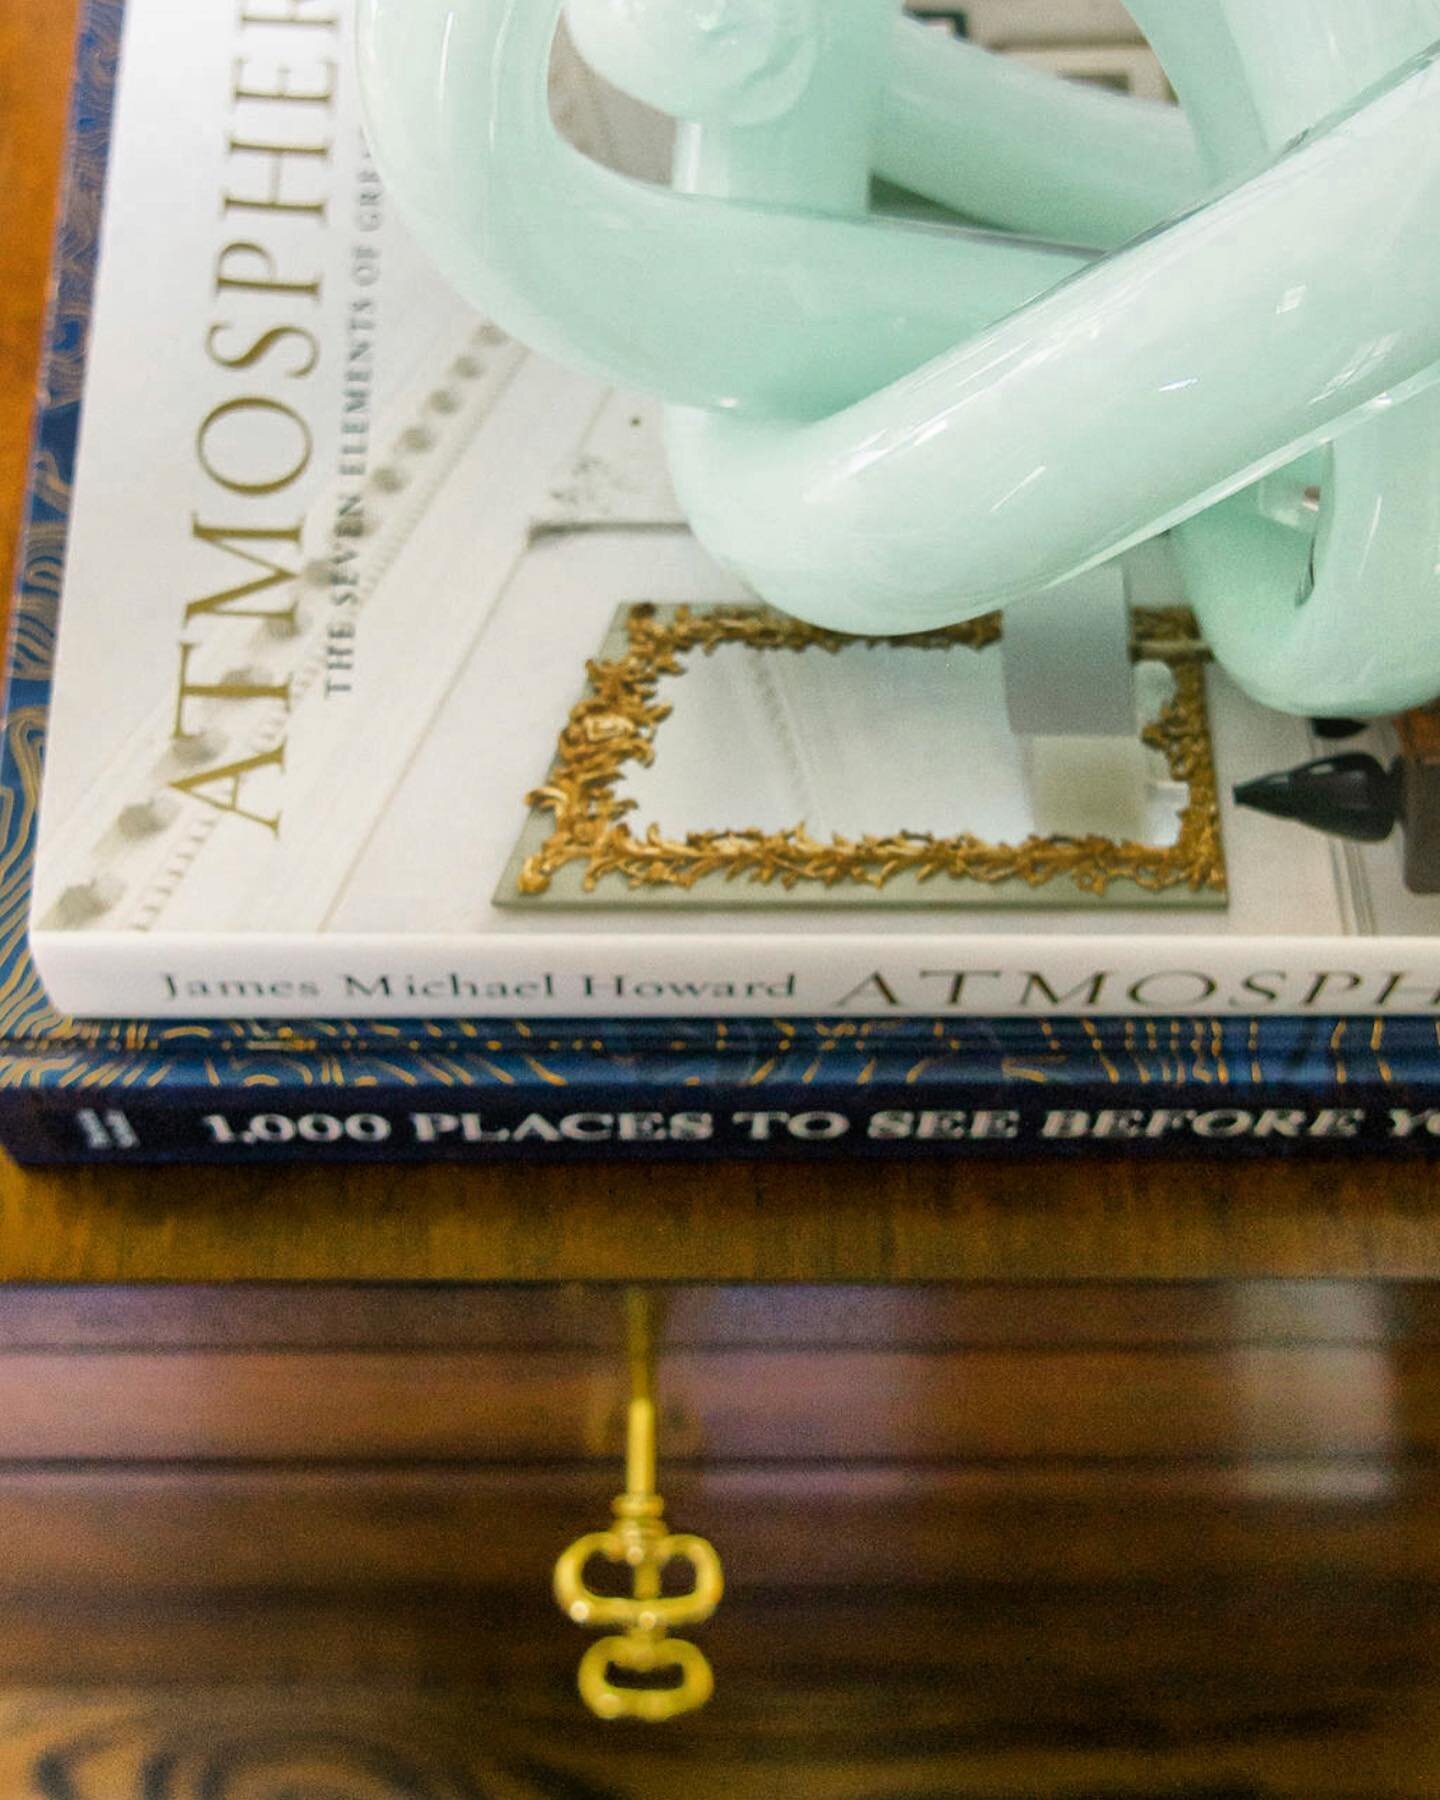 The key to getting through Monday is knowing you get to start the week like a badass! And that it&rsquo;s also okay to be tired 🥱 #keys #modernhistory #foyer #chest #cutieman #glassknots #books @lizgroganphotography